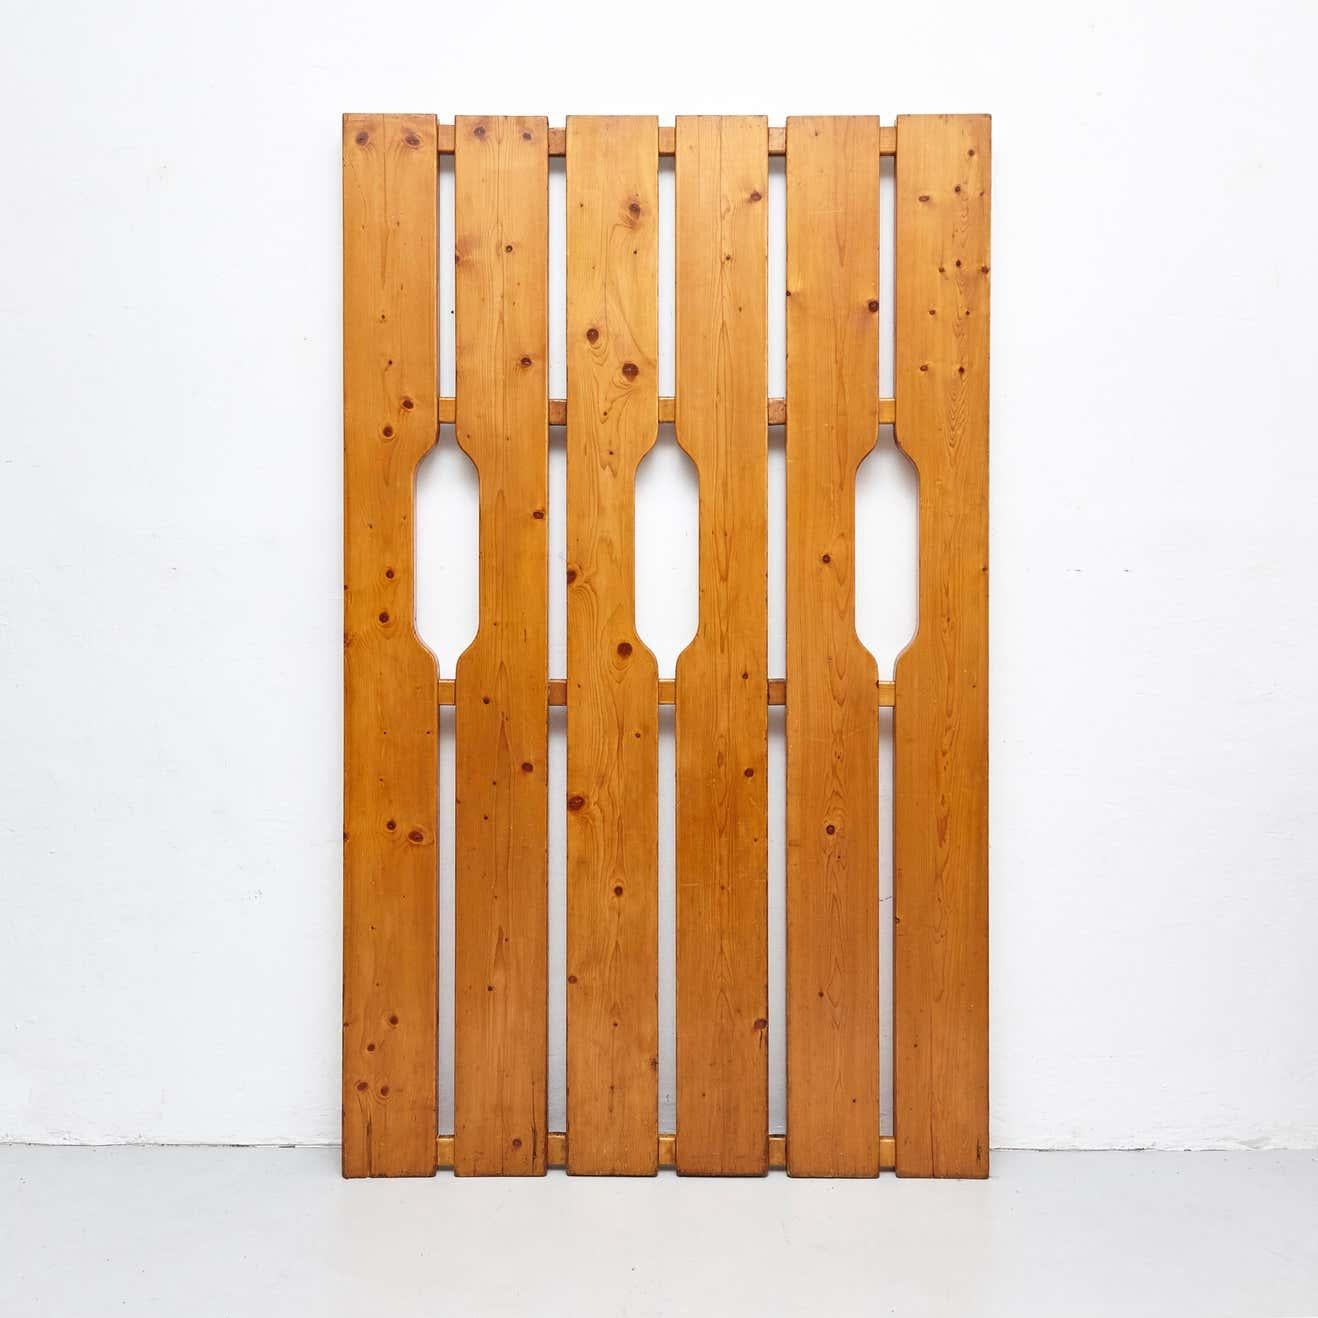 Spanish Charlotte Perriand Mid-Century Modern Wood Architectural Piece, circa 1960 For Sale